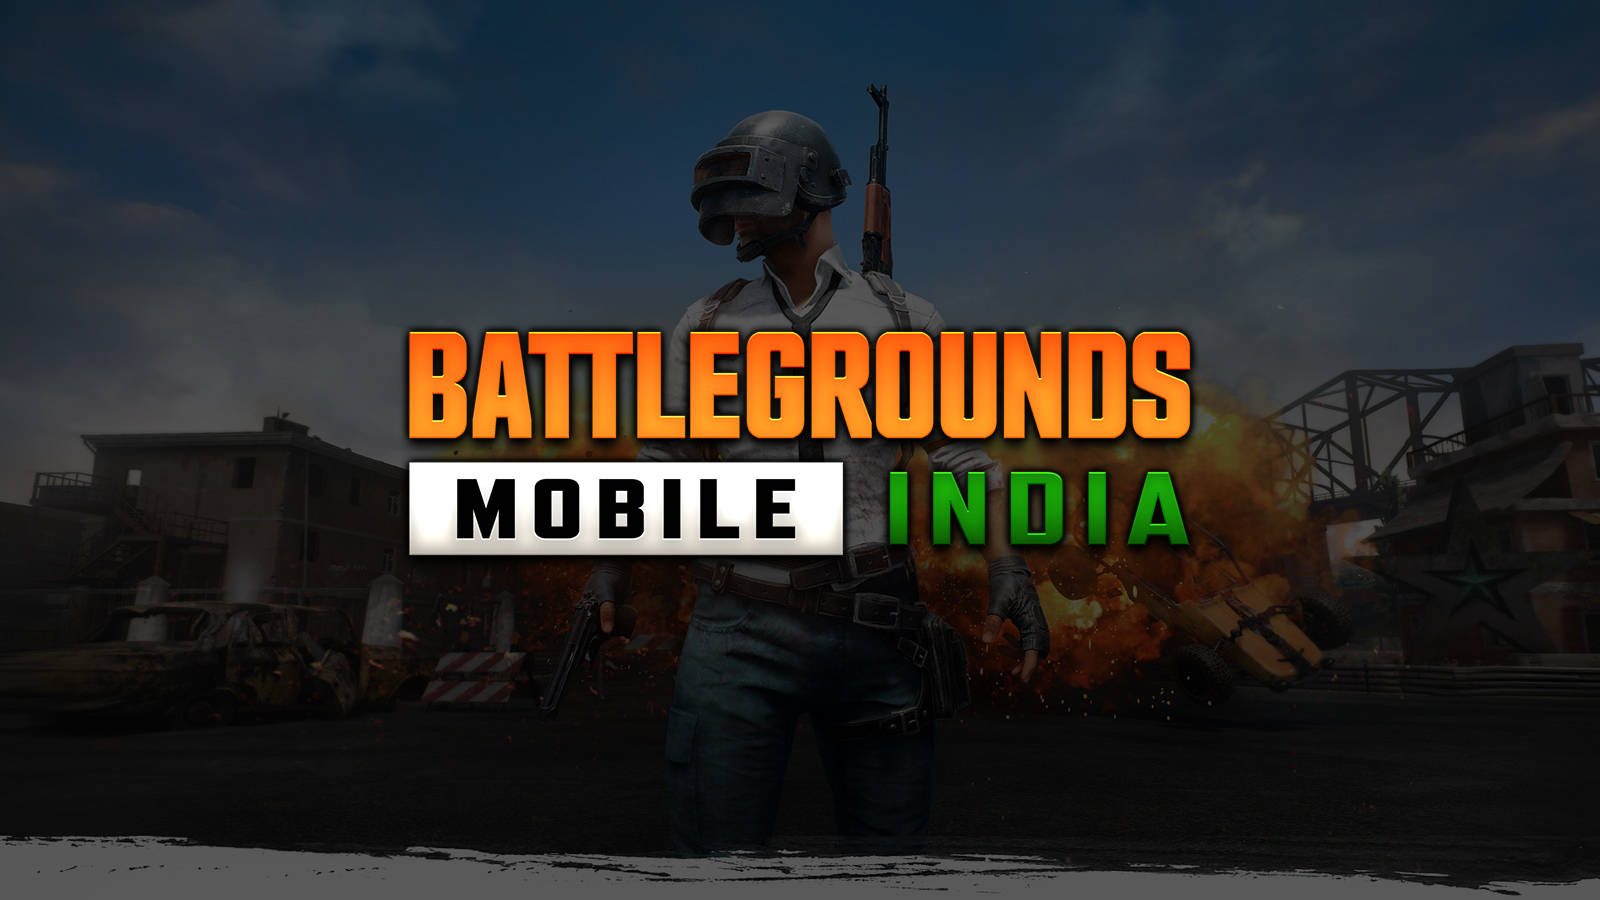 Battleground India Colourful Mobile Game Title